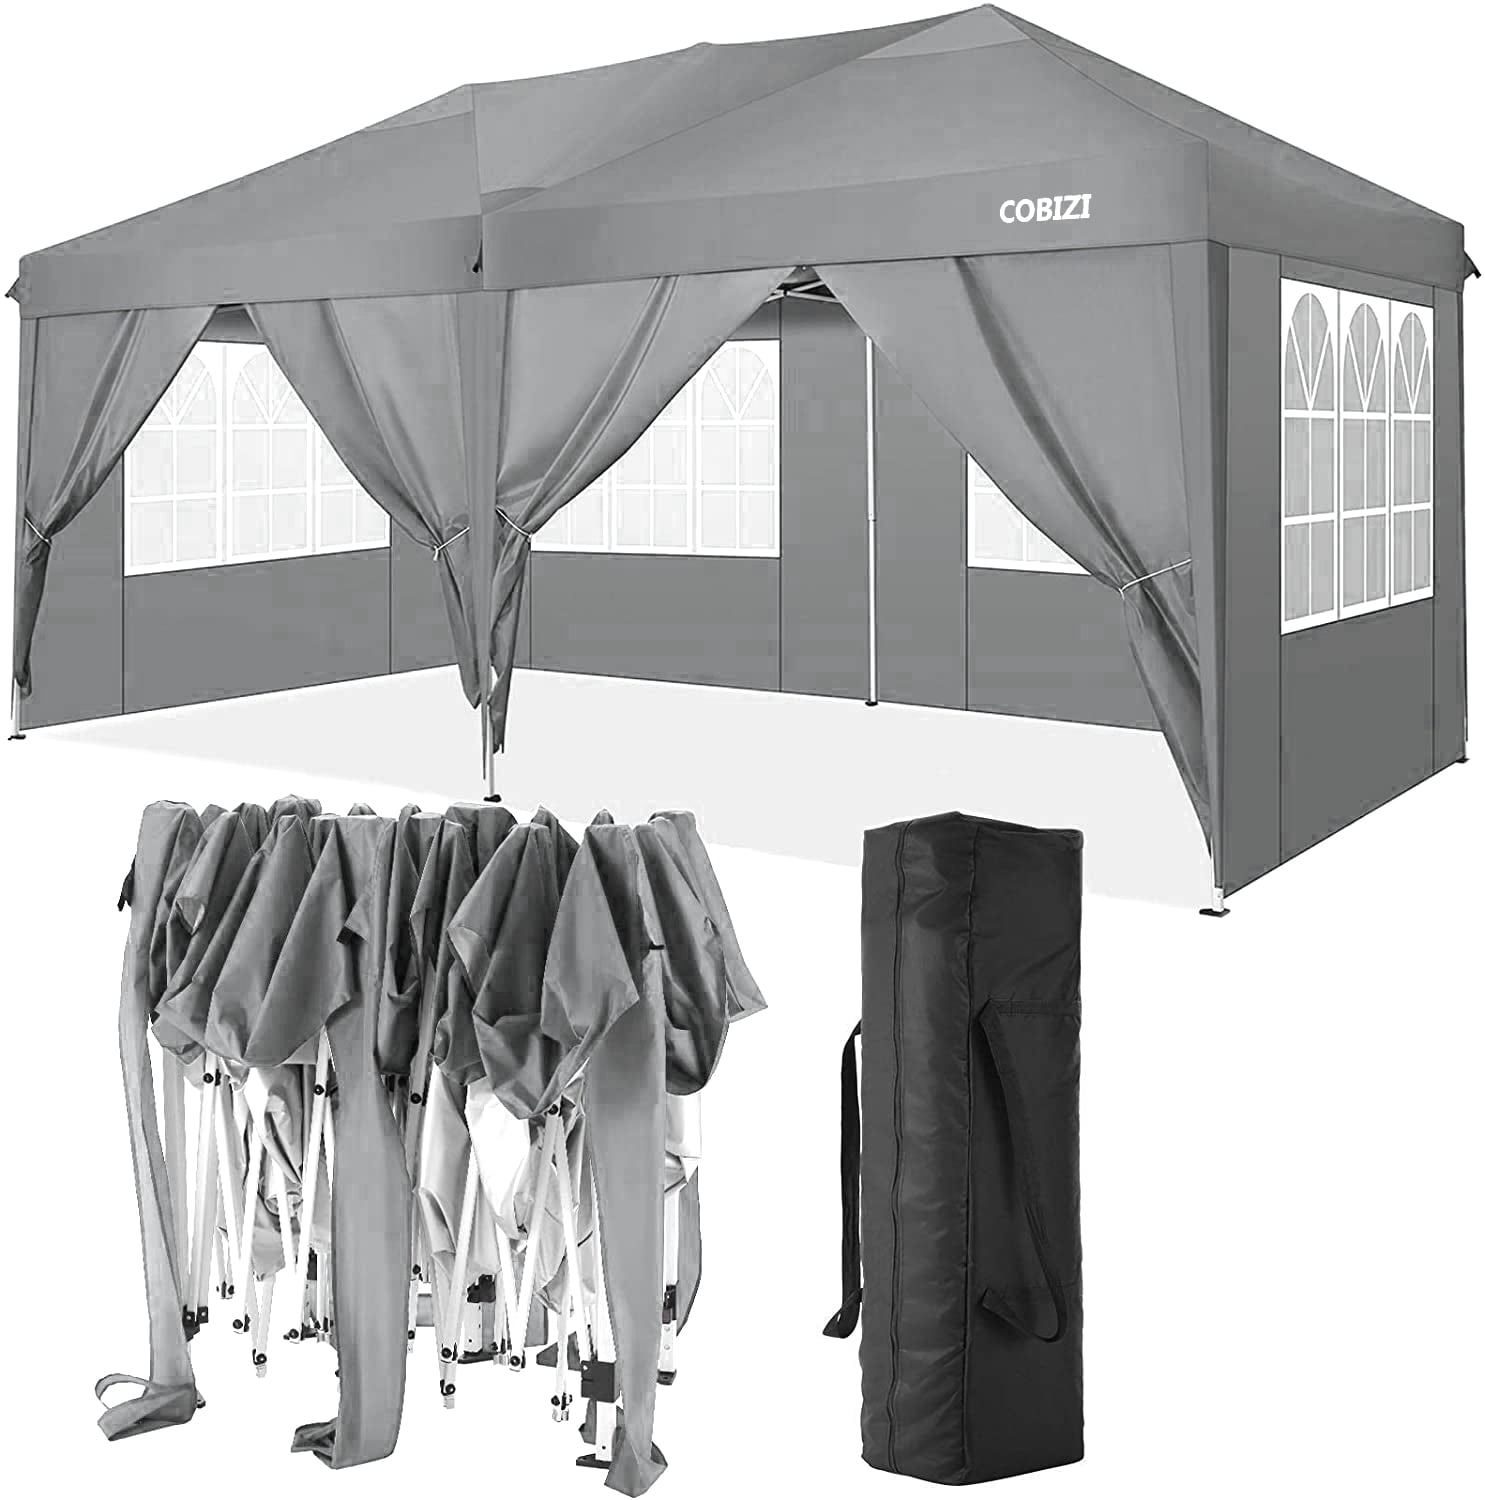 morfine Tijdens ~ Idioot 10' x 20' Canopy Tent EZ Pop Up Party Tent Portable Instant Commercial  Heavy Duty Outdoor Market Shelter Gazebo with 6 Removable Sidewalls and  Carry Bag, Black - Walmart.com